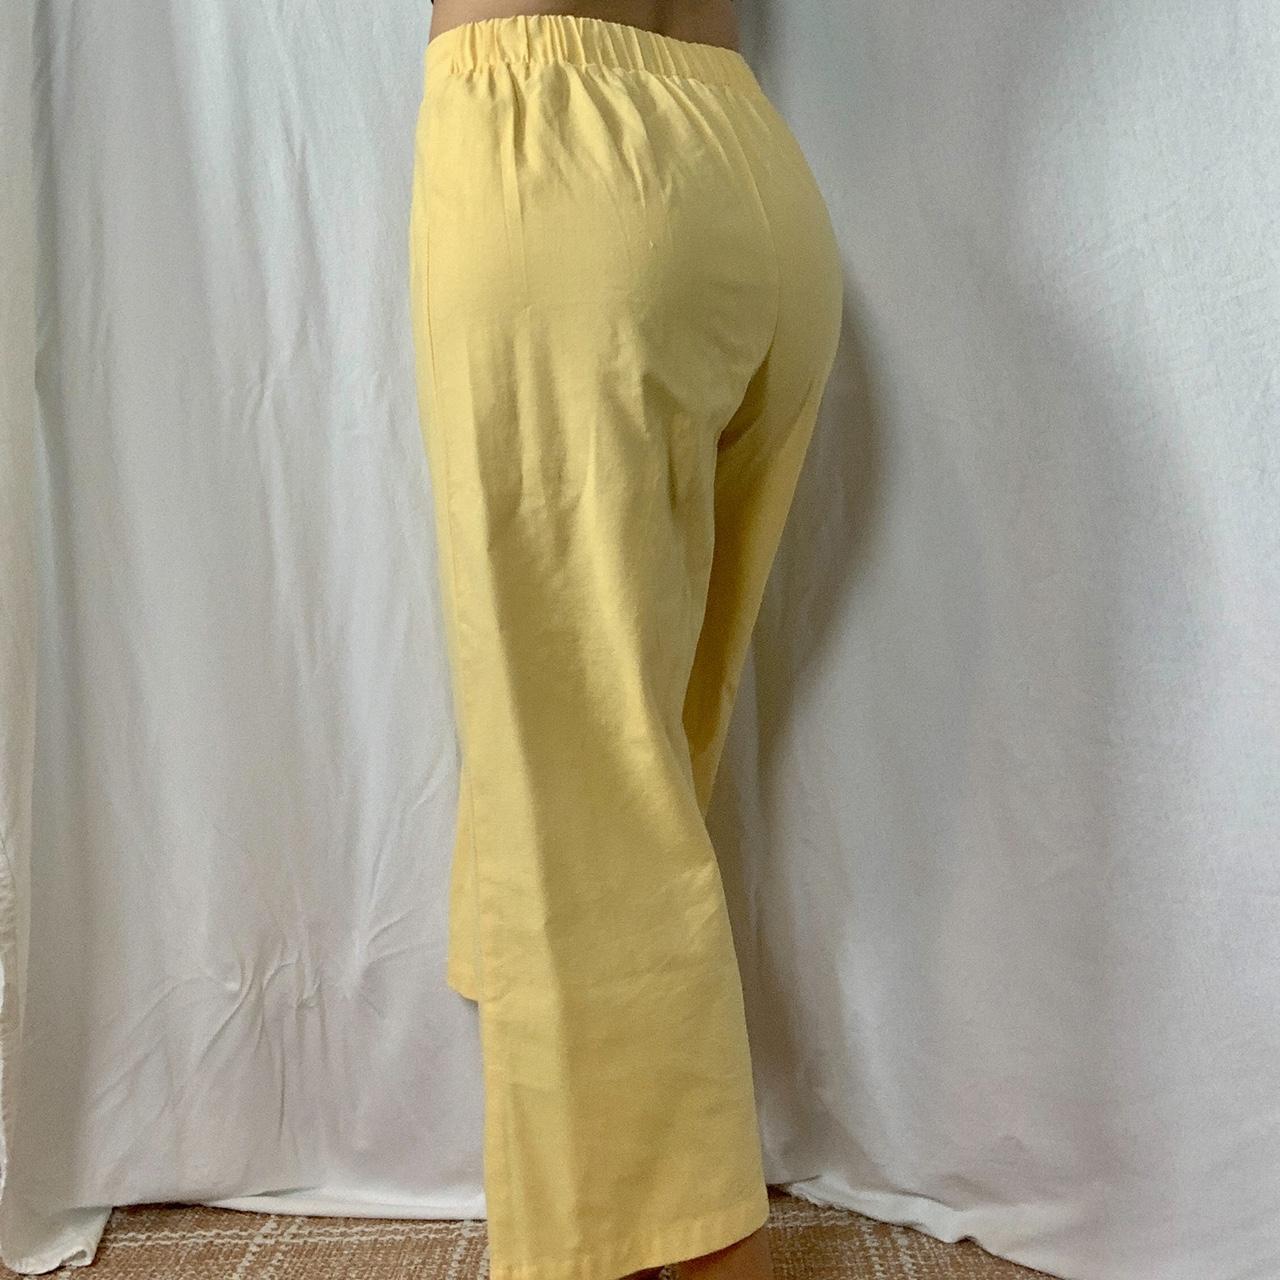 Product Image 3 - YELLOW LINEN PANTS

~ free shipping